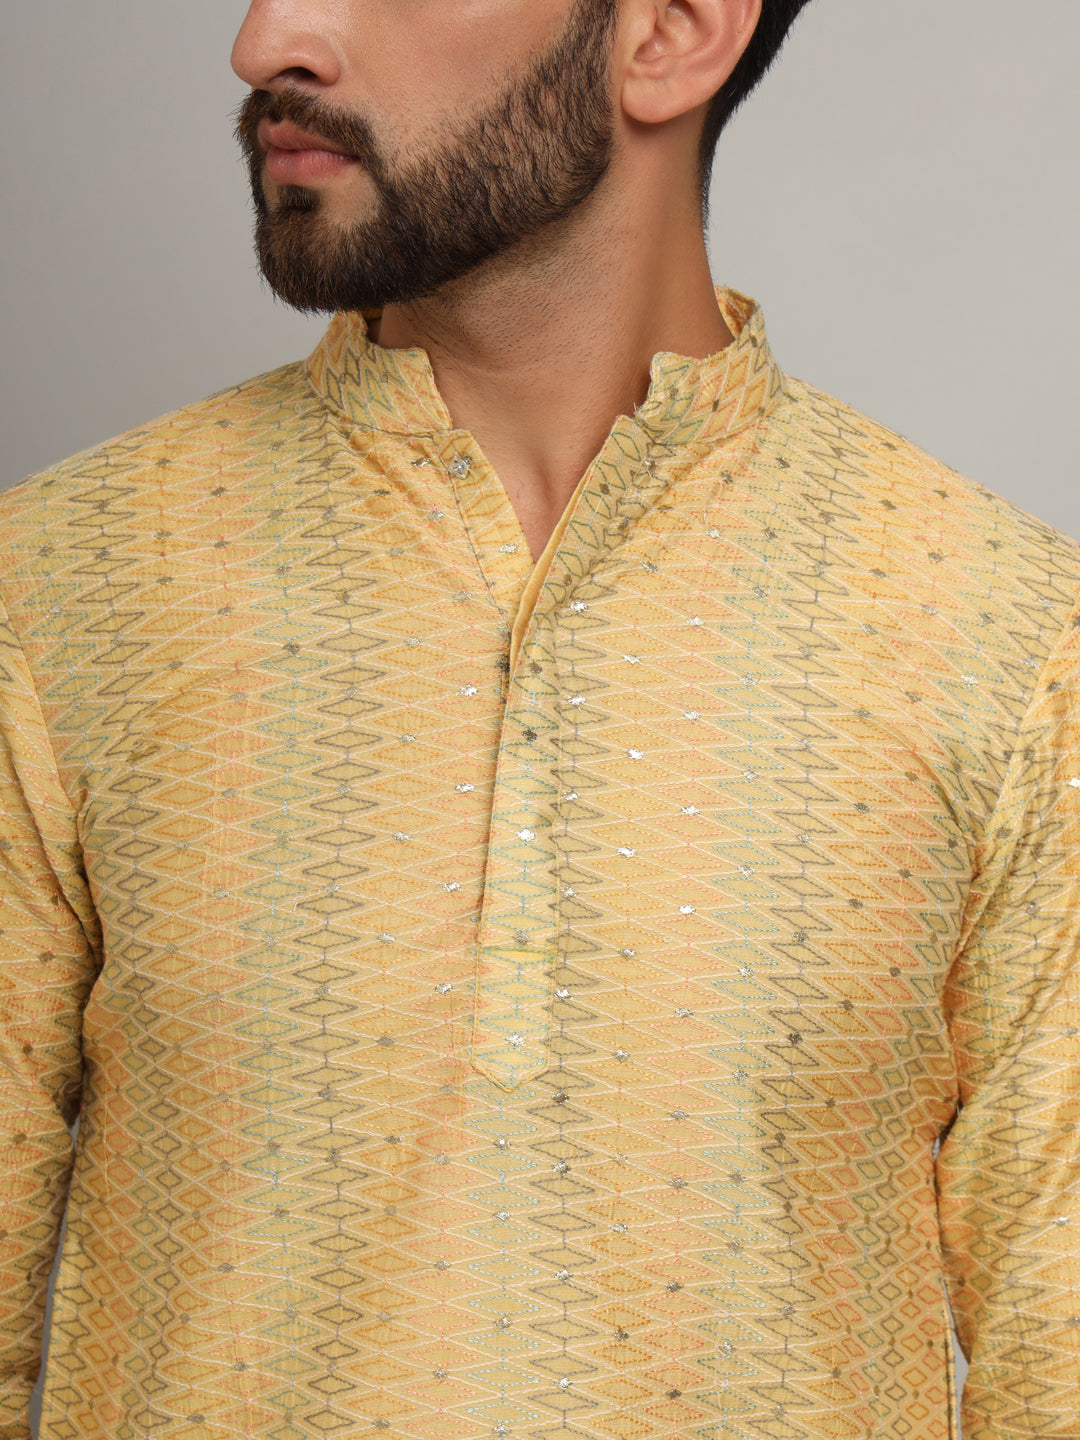 Yellow Silk Ethnic Kurta With Foil Embroidery